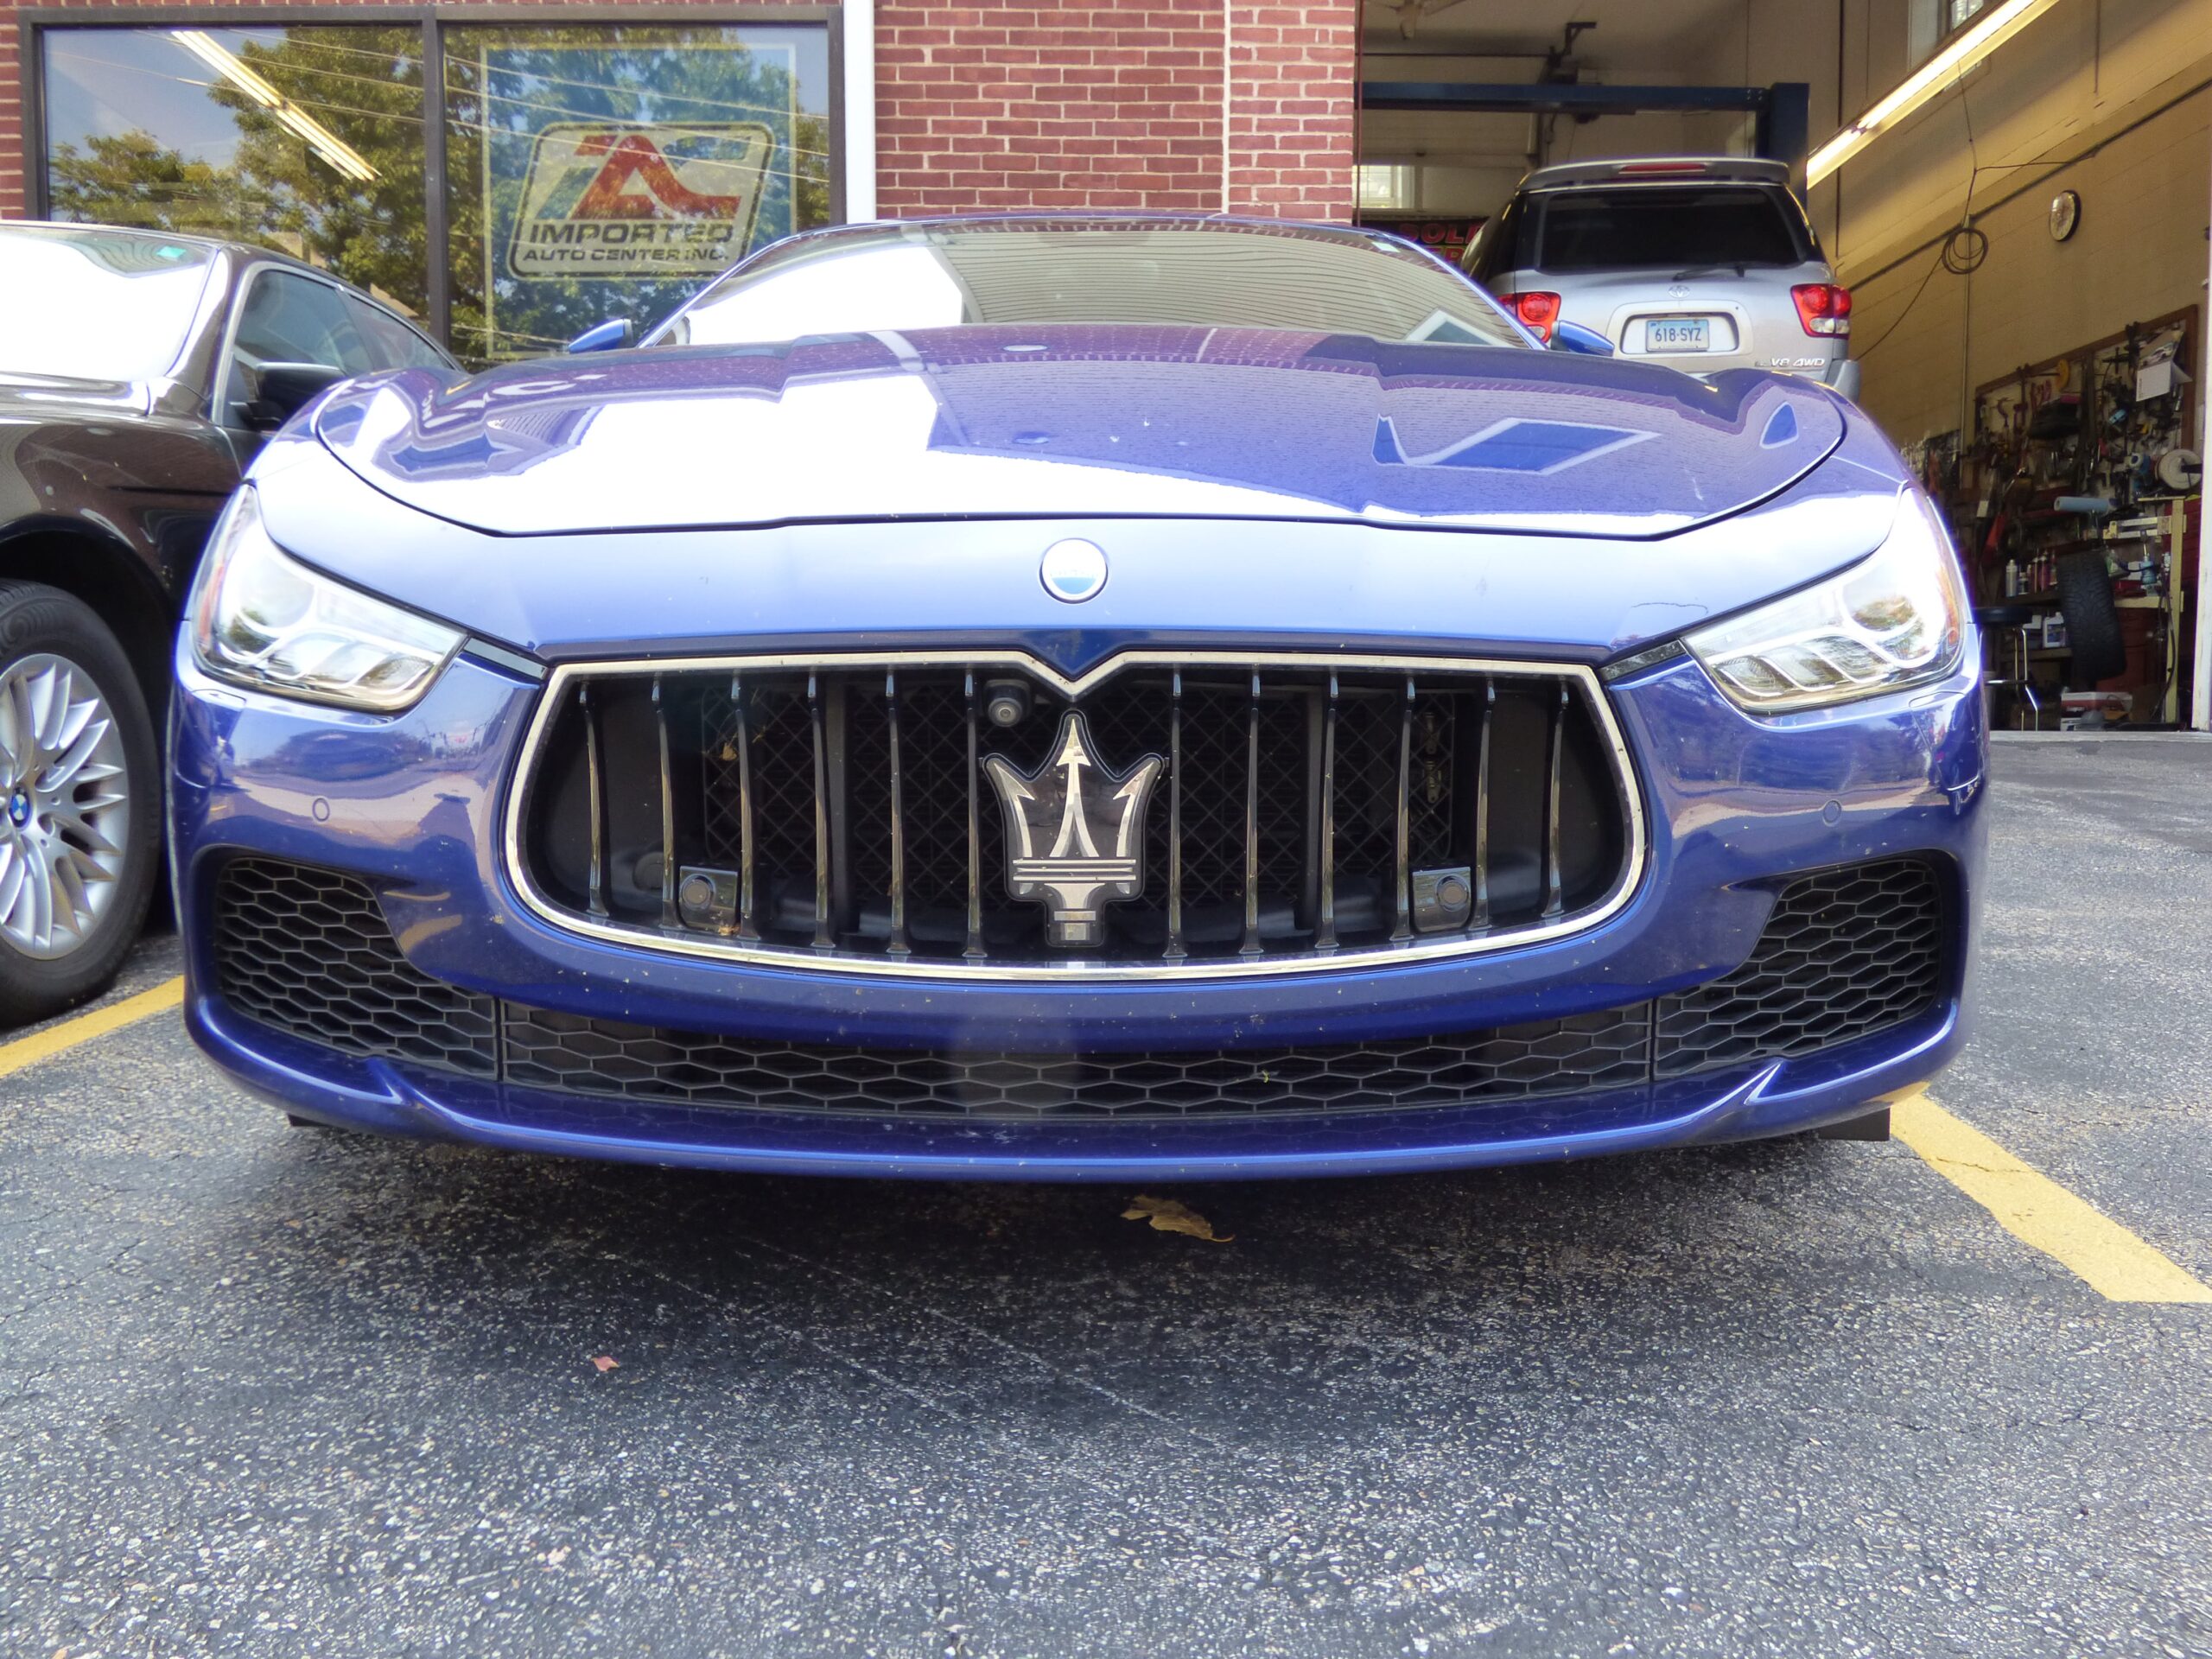 Blue Maserati parked in front of imported auto center